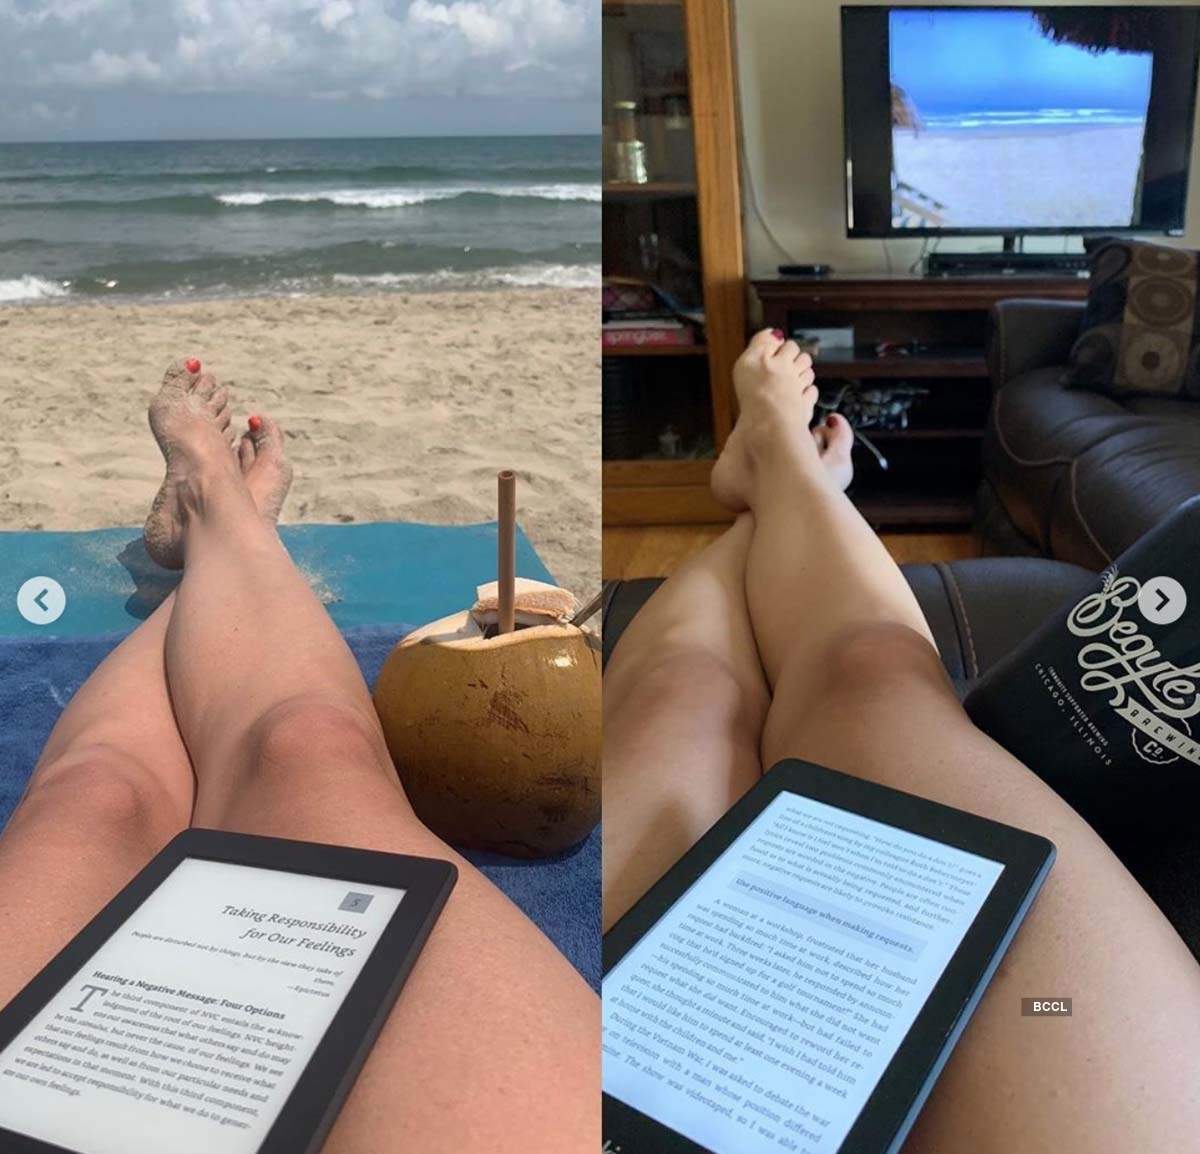 Hilarious pictures of people taking up #QuarantineTravelChallenge to recreate their holidays at home